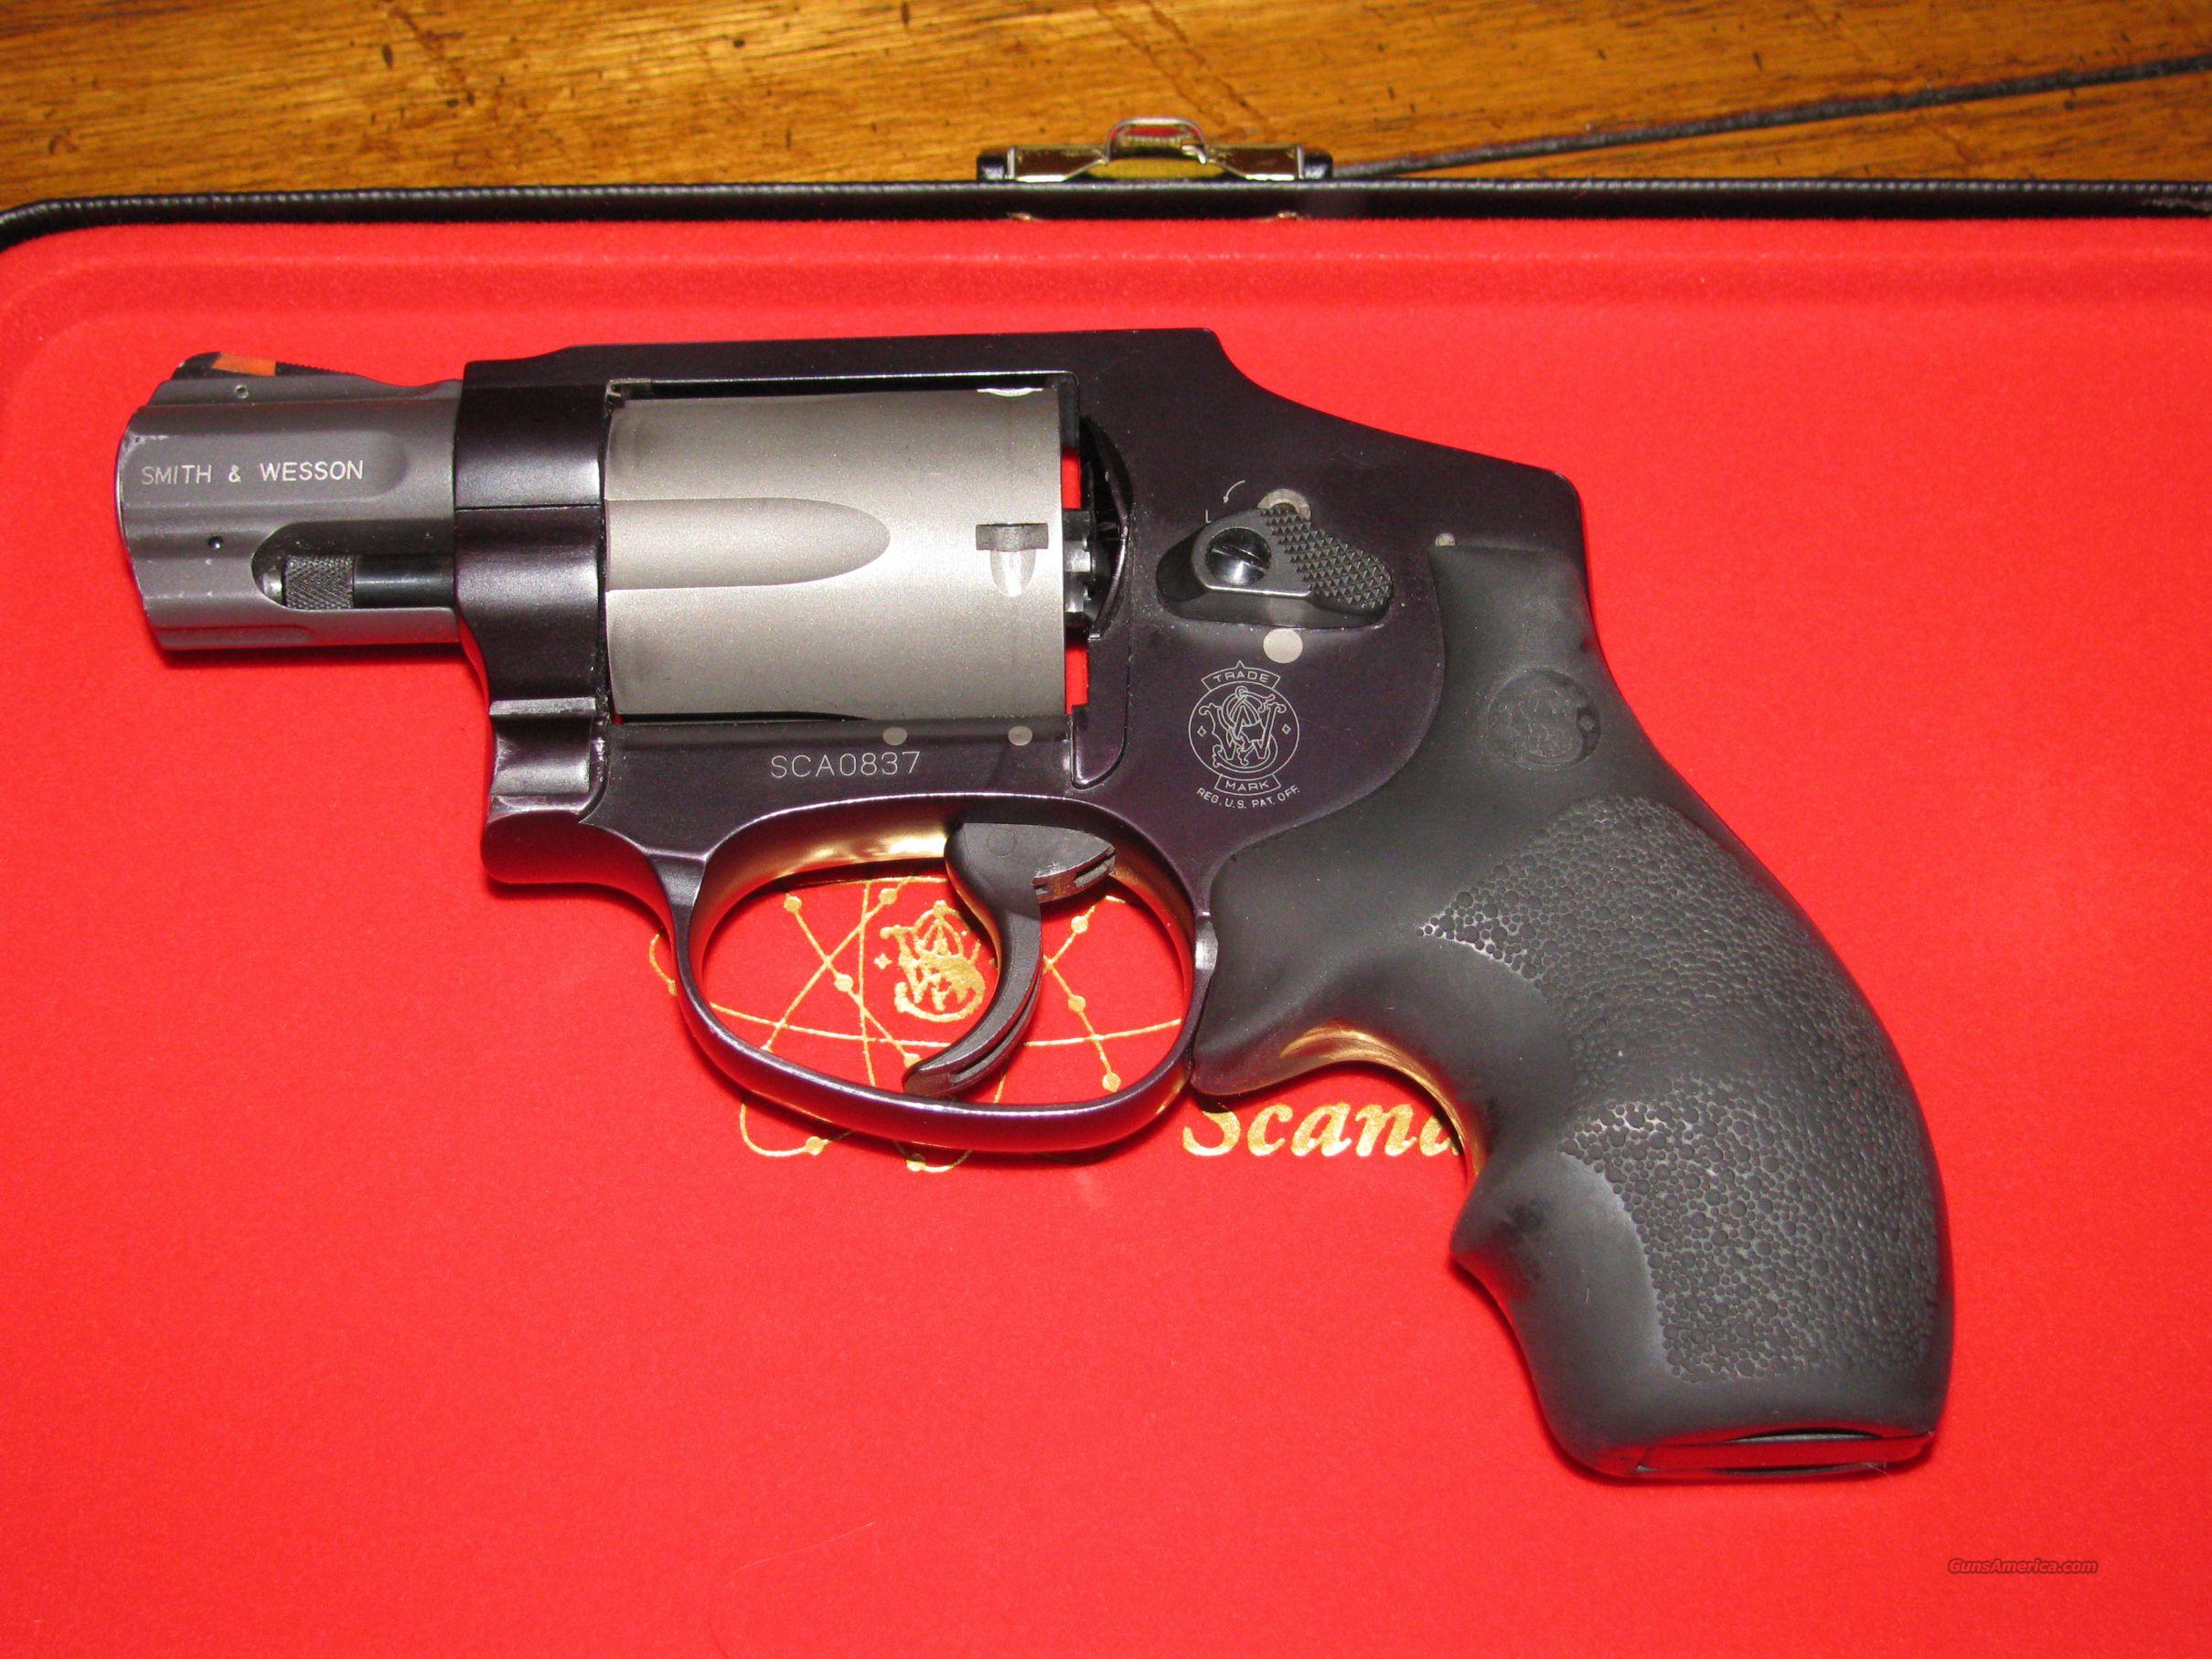 s-w-smith-wesson-airlite-340pd-34-for-sale-at-gunsamerica